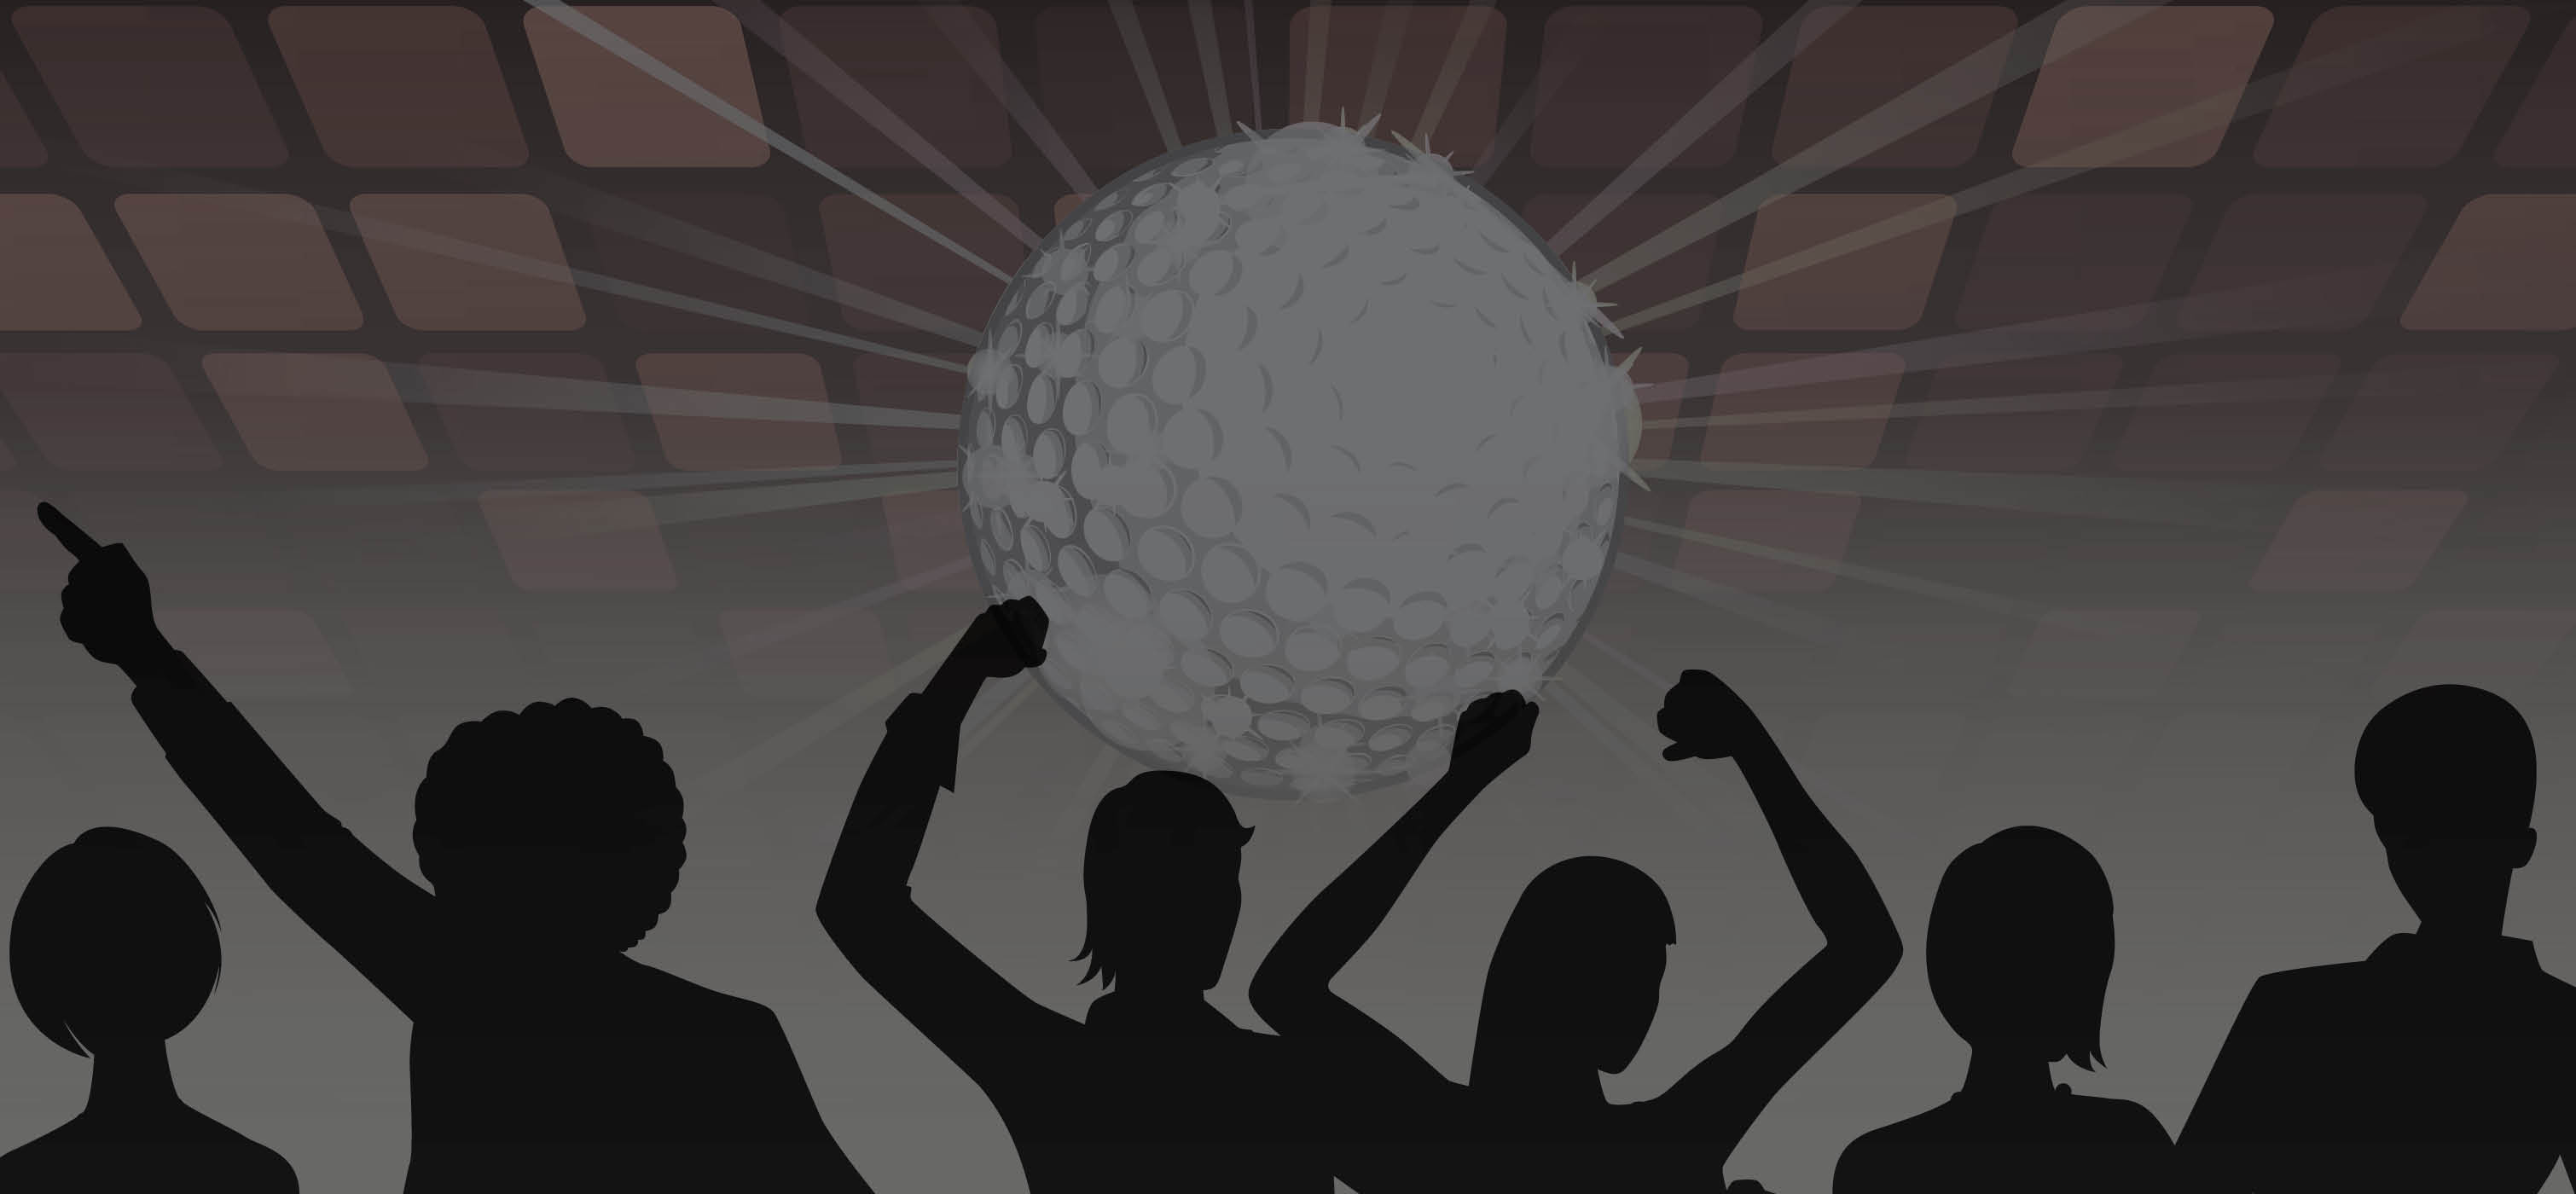 Golf ball that looks like a disco ball with silhouettes of people dancing around it